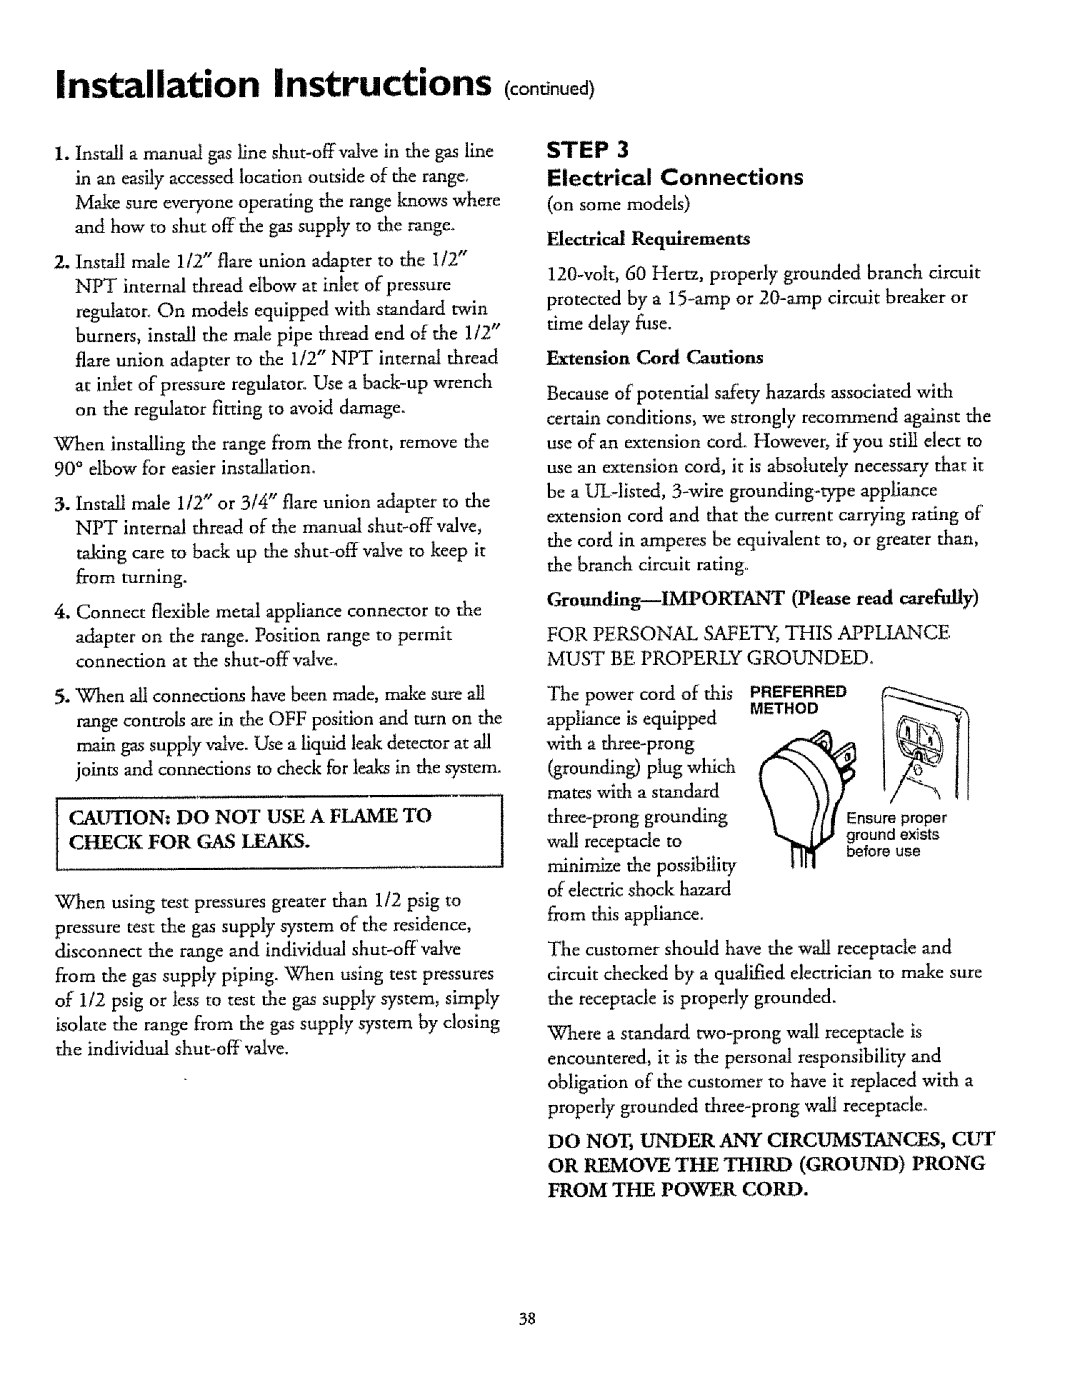 Sears 75375 Installation Instructions continued, Hectrical Requirements, Grounding--IMPORTANT Please read carefully, Ii 